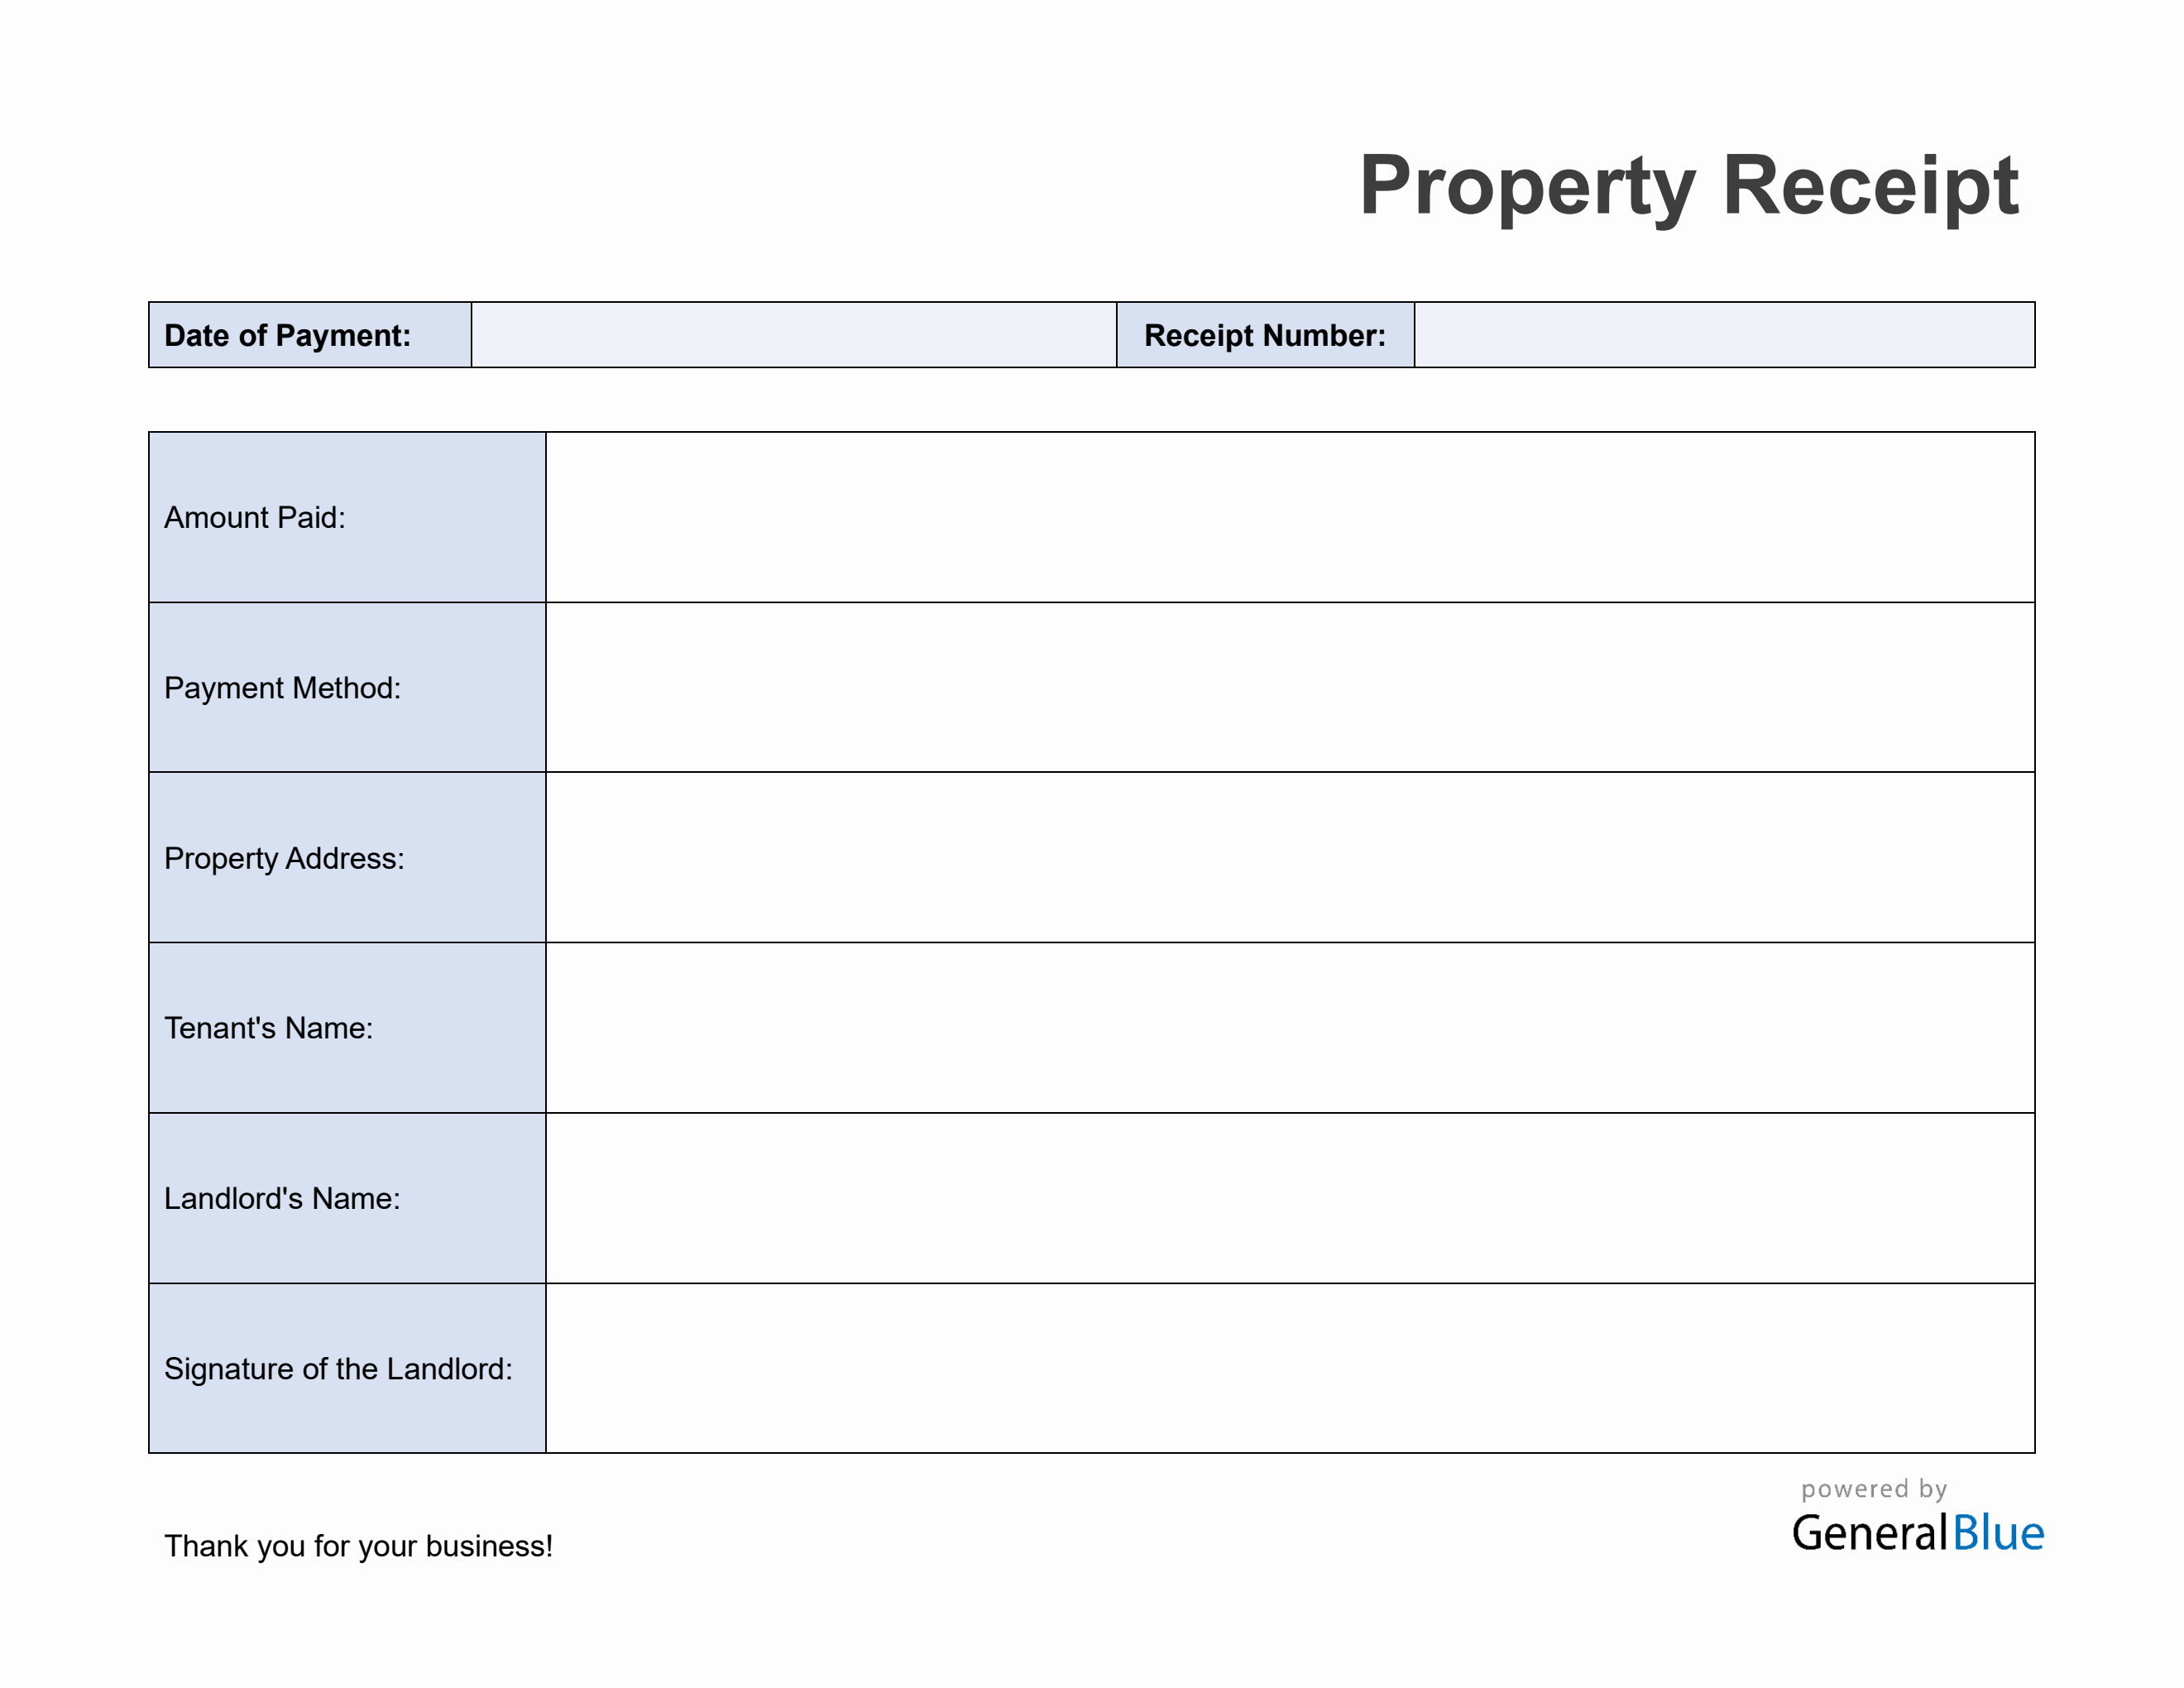 the word property